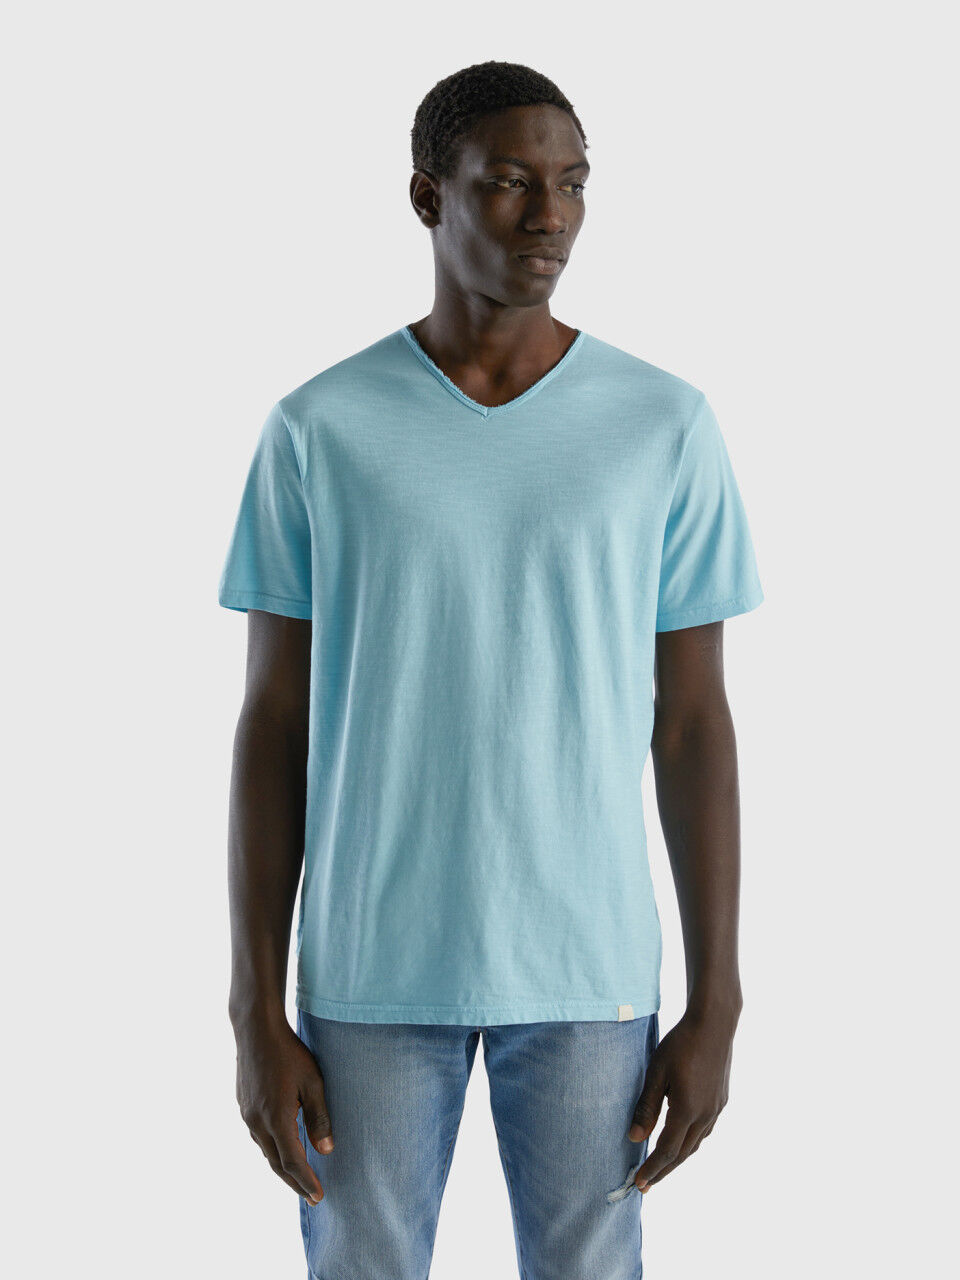 V-neck t-shirt in 100% cotton